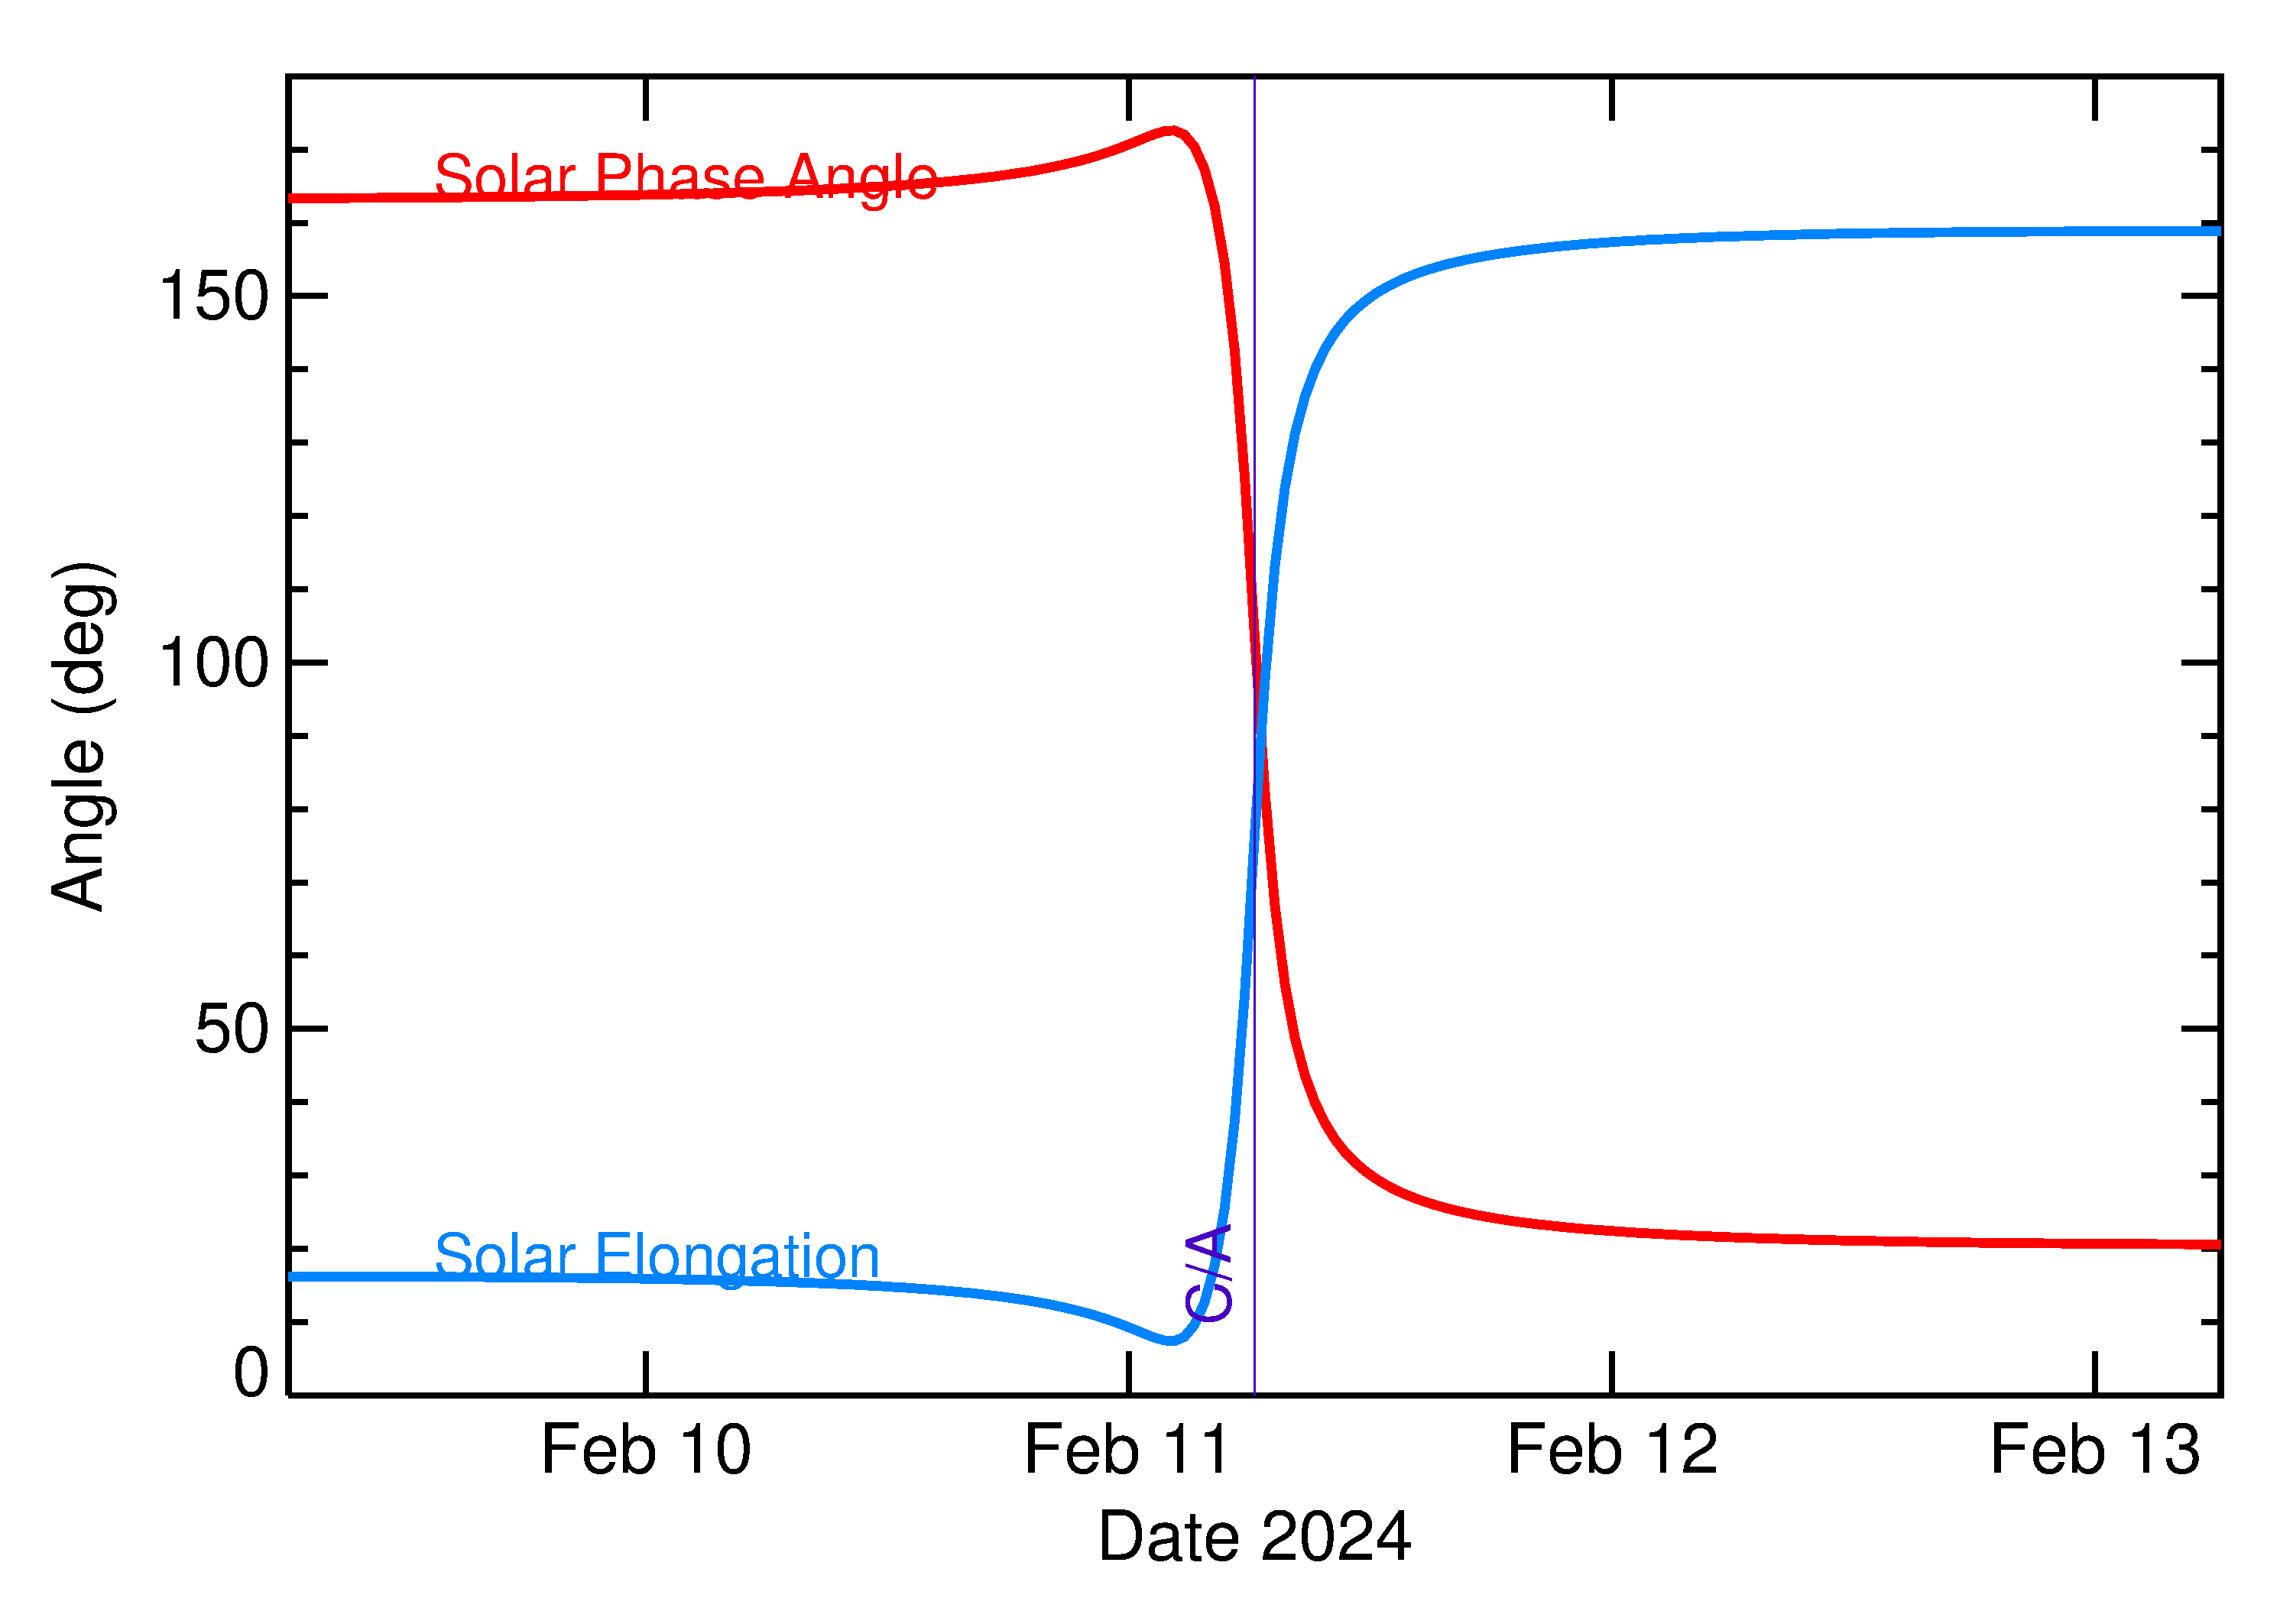 Solar Elongation and Solar Phase Angle of 2024 CH4 in the days around closest approach